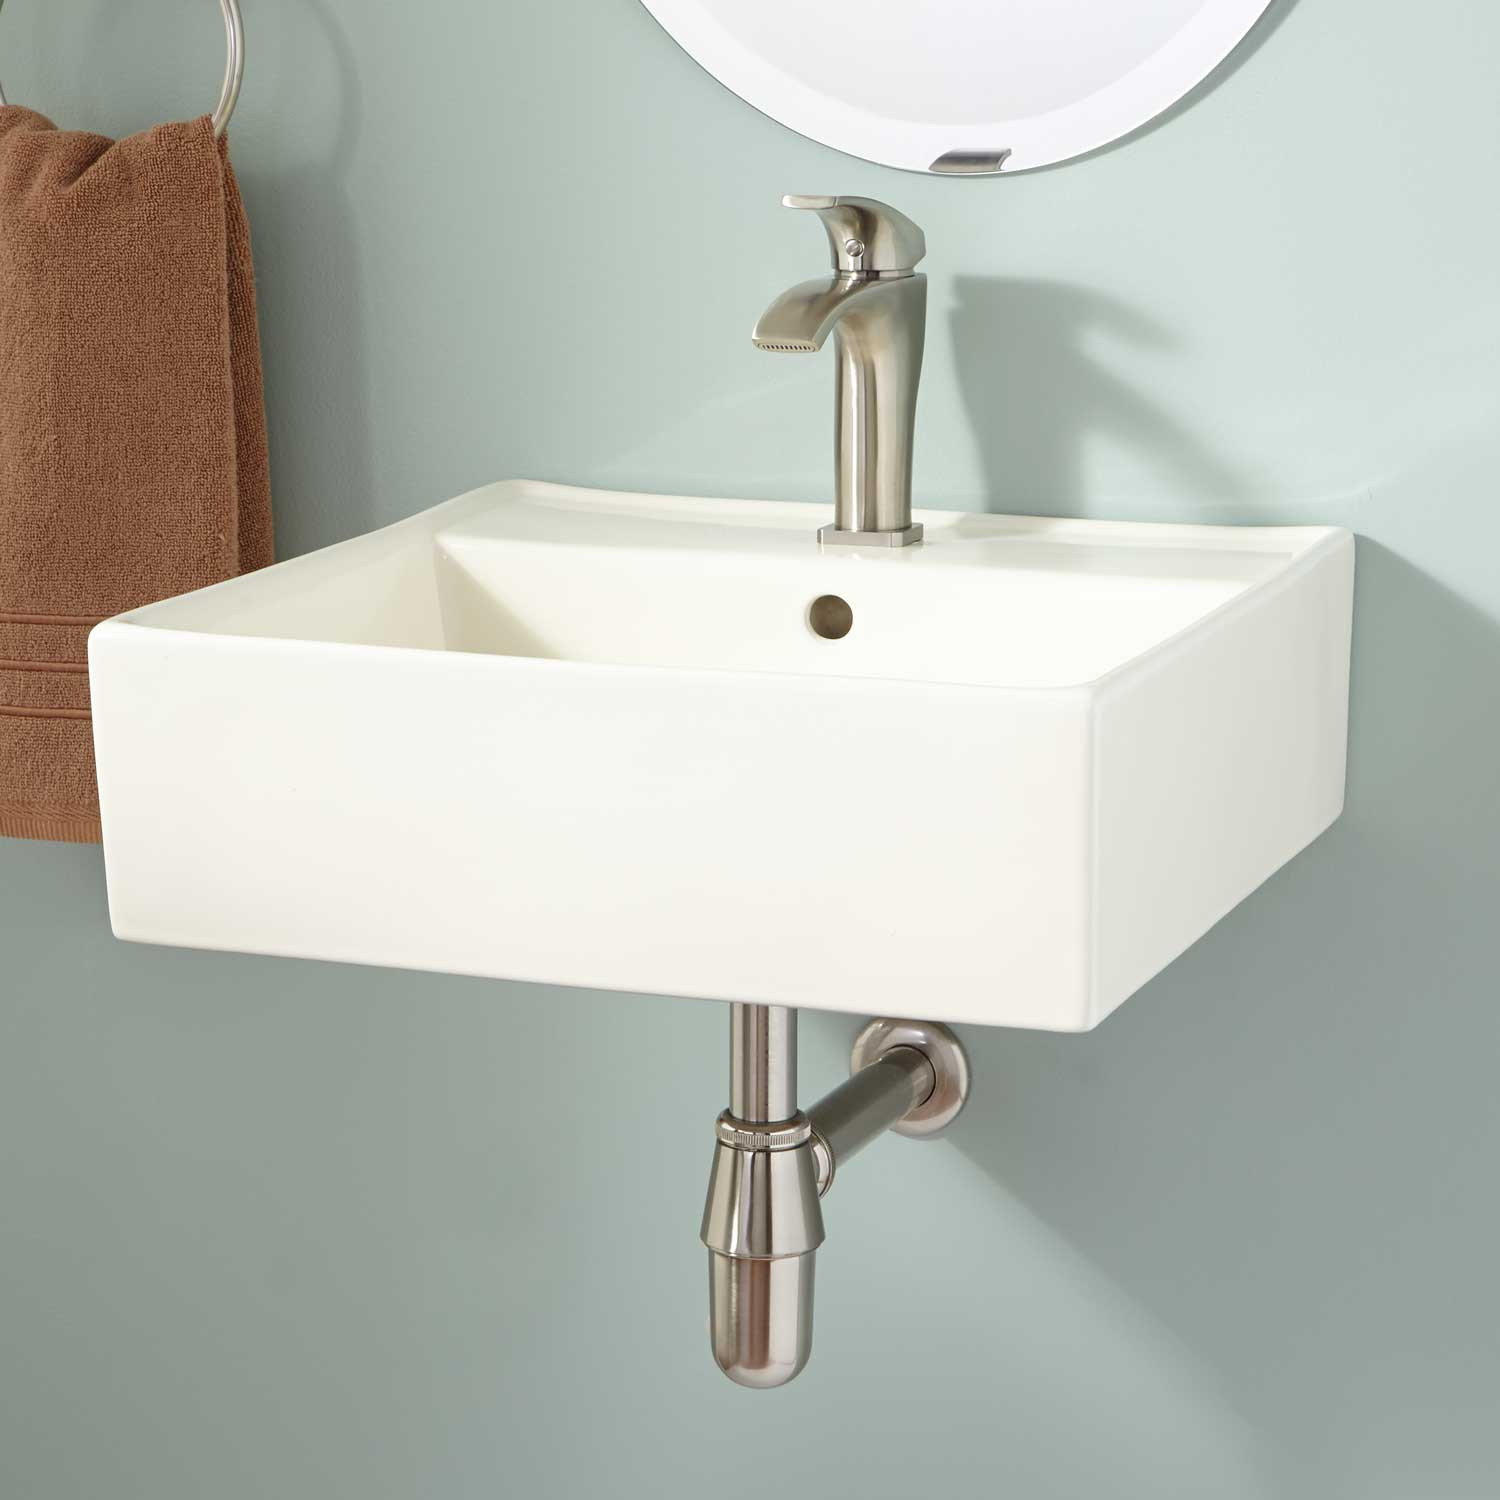 Wall Mounted Kitchen Sinks
 Signature Hardware Audrie Porcelain Wall Mount Bathroom